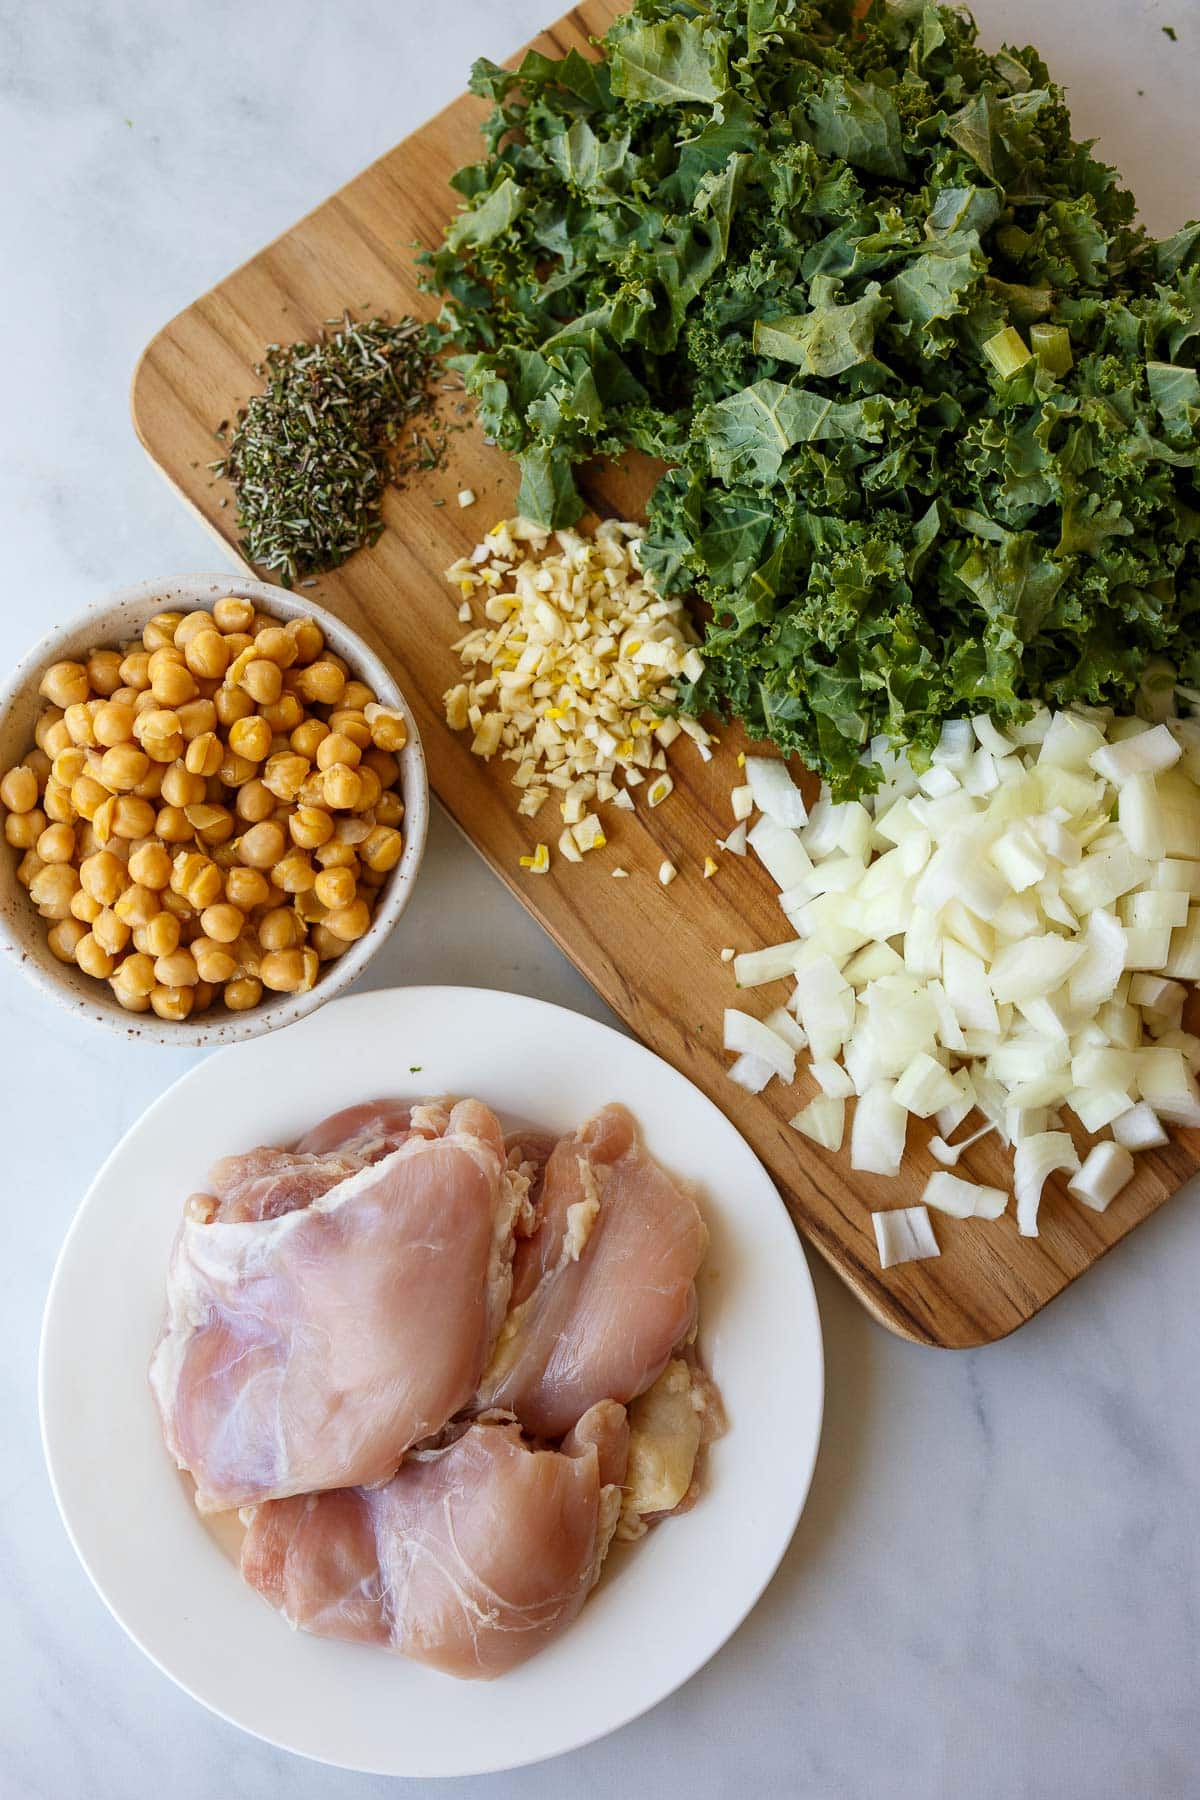 ingredients for chicken and kale soup - chopped kale, onion, garlic, rosemary, bowl of chickpeas, plate of chicken thighs. 